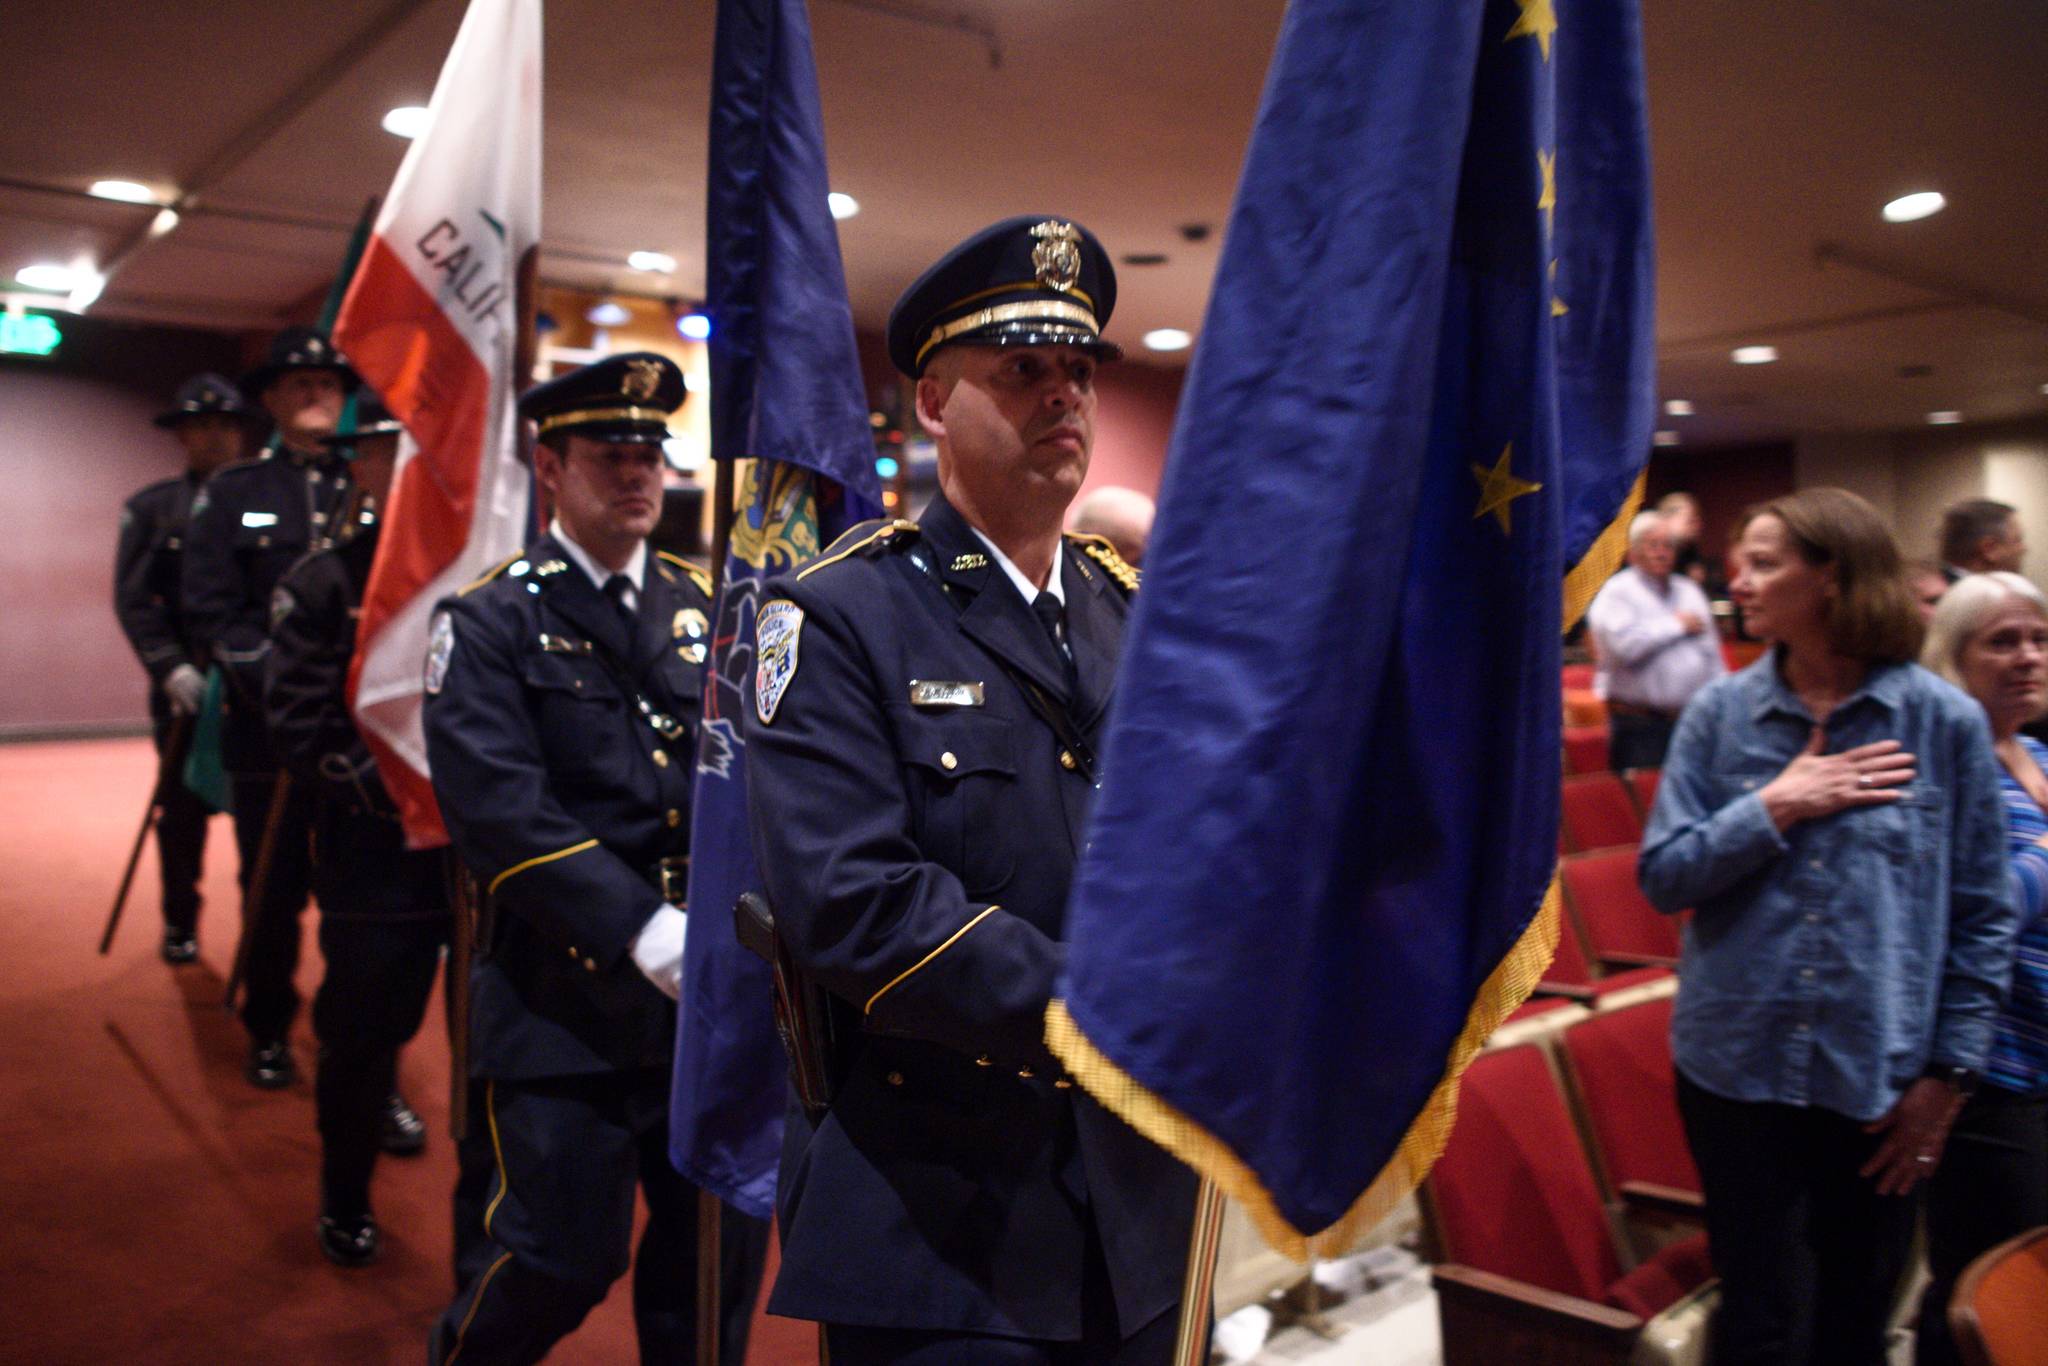 A first responders Honor Guard enter the auditorium for the Guardian memorial at Juneau-Douglas High School: Yadaa.at Kalé on Friday, June 7, 2019. (Michael Penn | Juneau Empire)